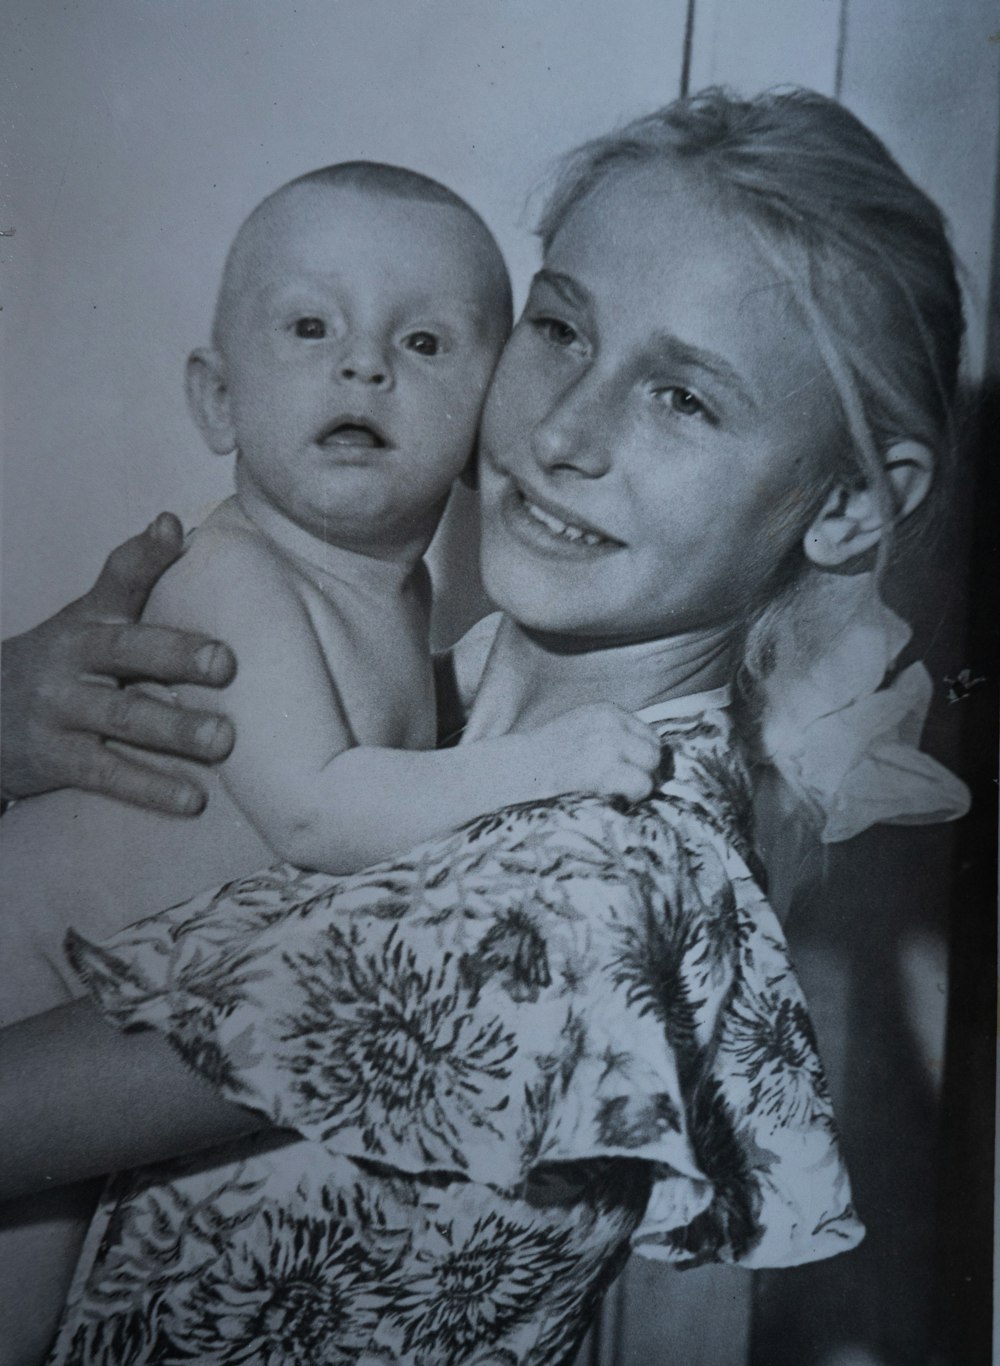 a black and white photo of a woman holding a baby